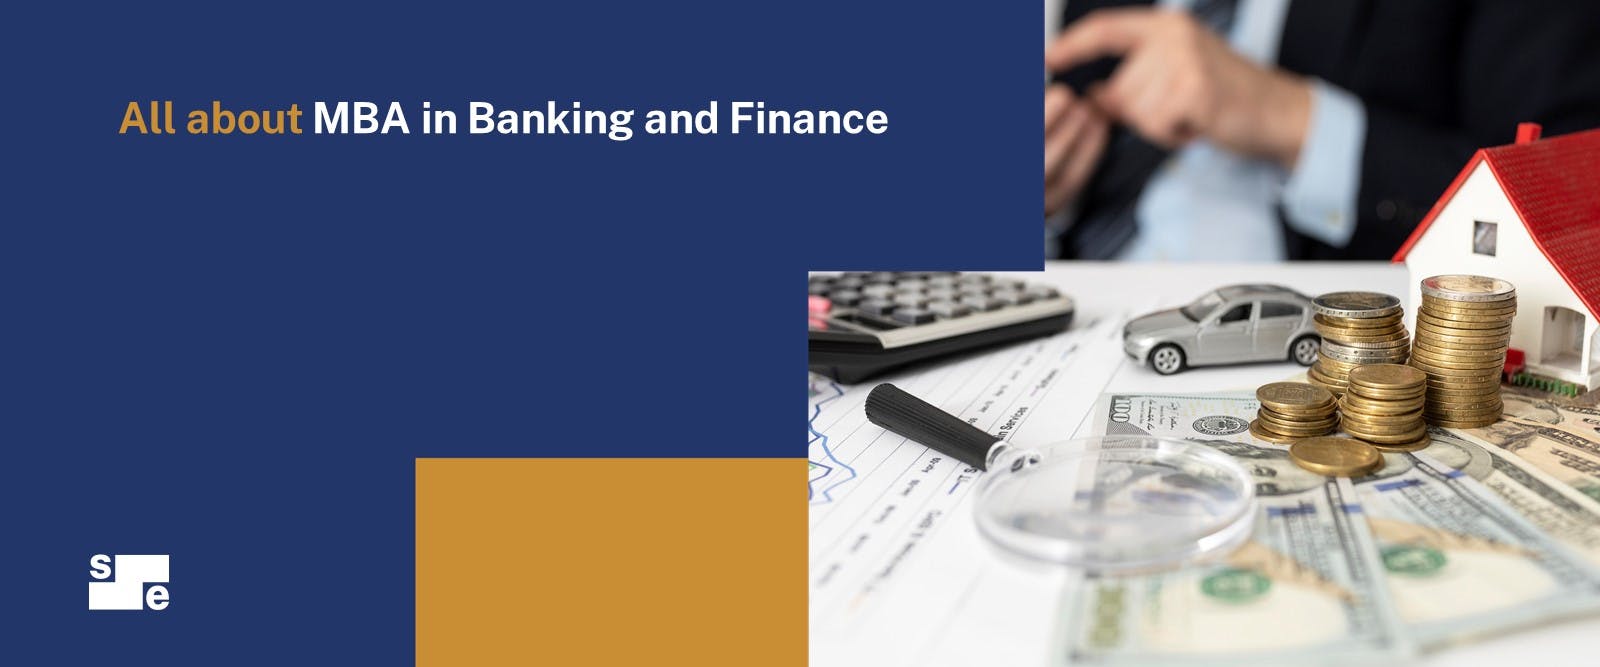 MBA in Banking and Finance: The Complete Guide